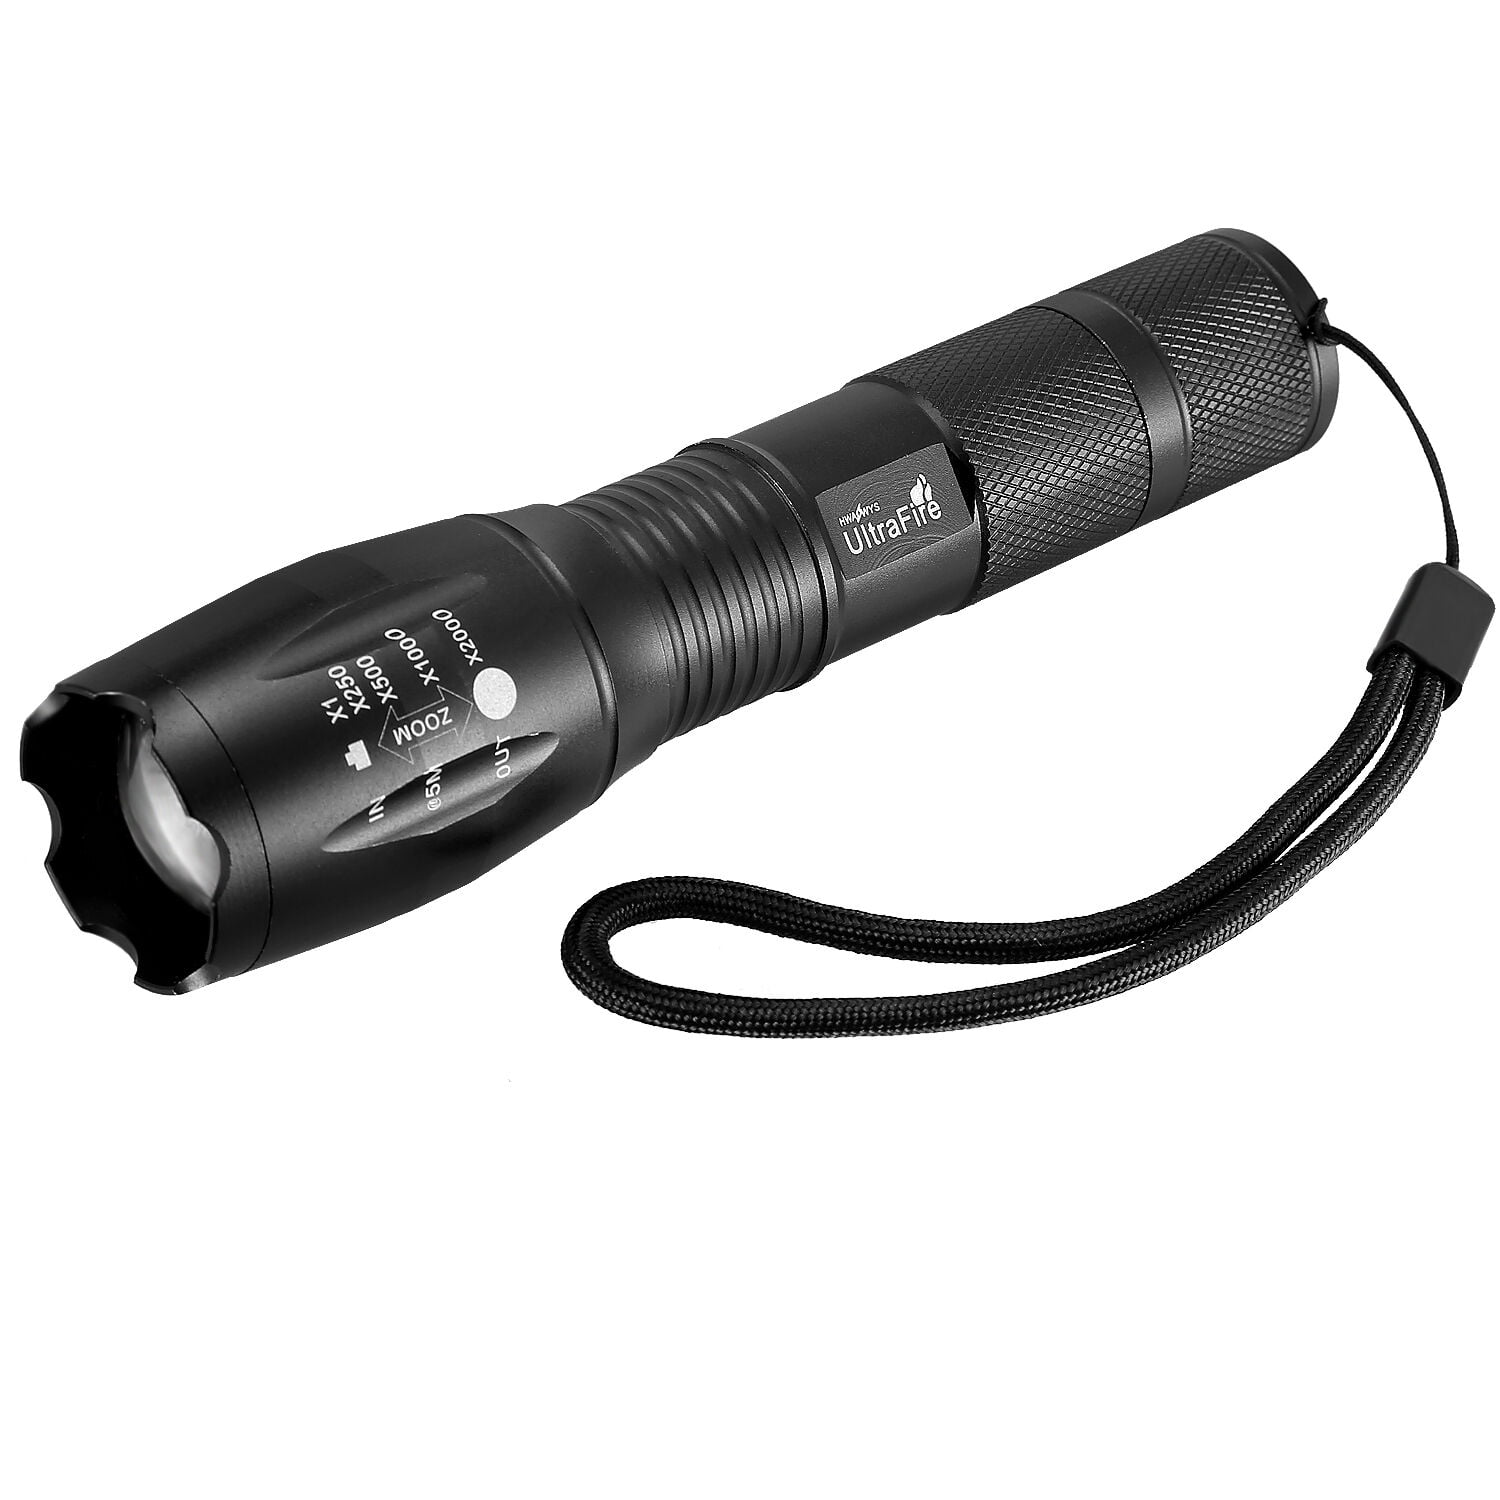 UltraFire Tactique CREE 10000lm 5 Modes T6 LED 18650 Lampe Torche Zoomable Focus... 